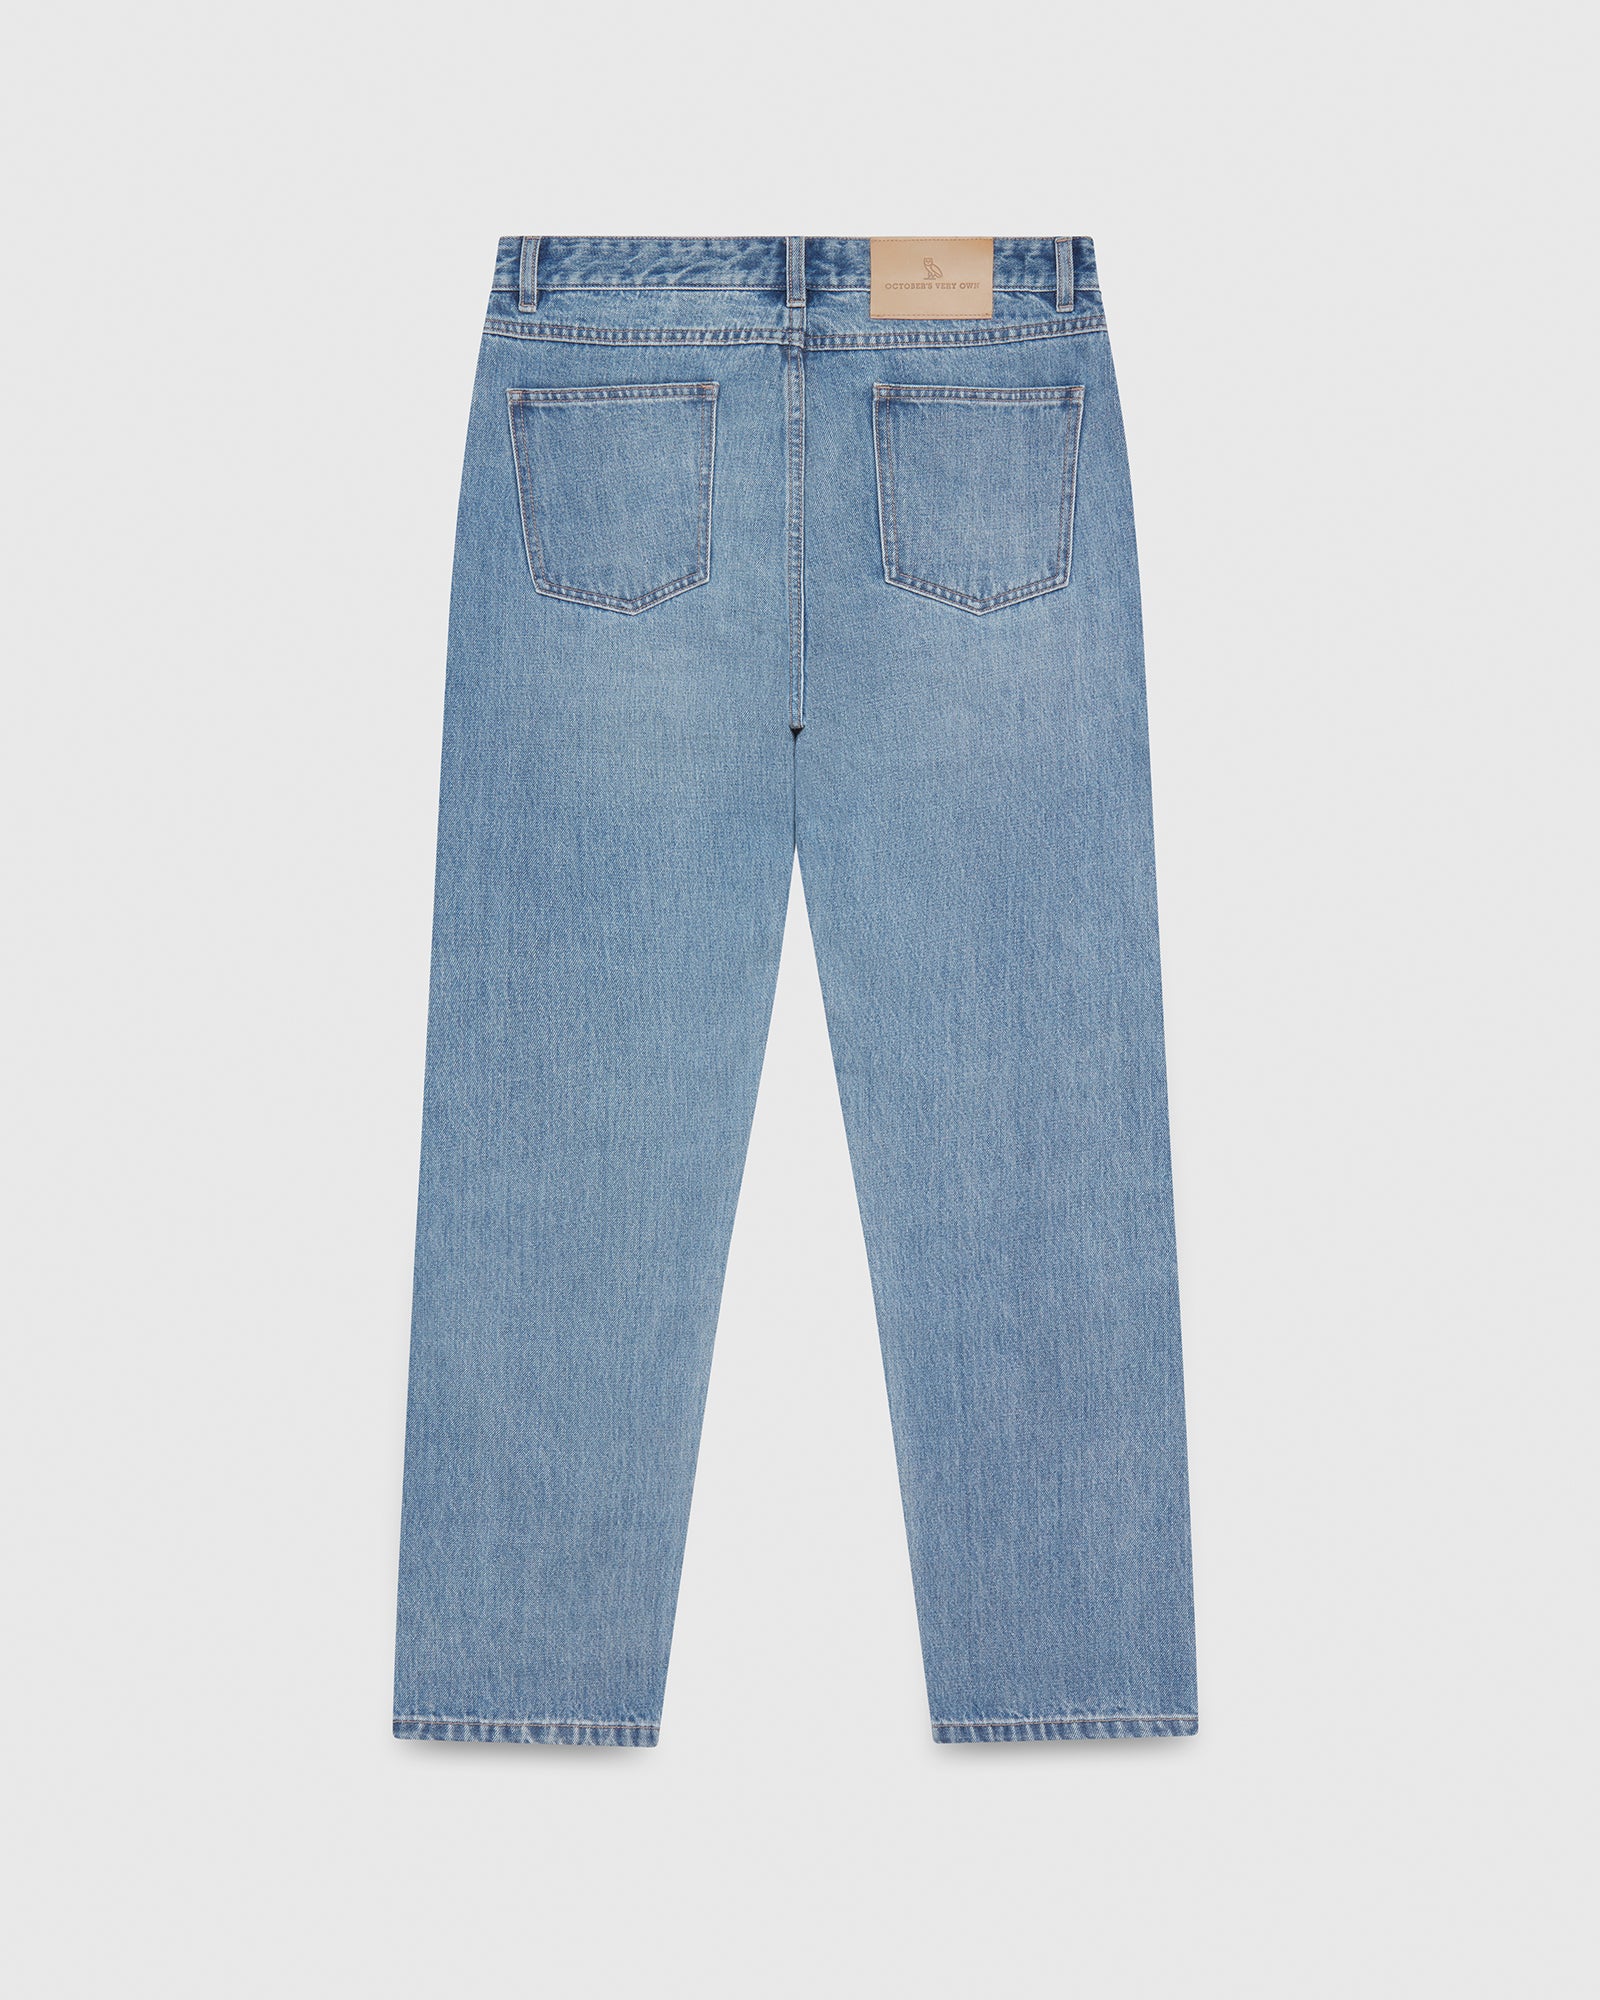 5 Pocket Relaxed Fit Jean - Washed Indigo